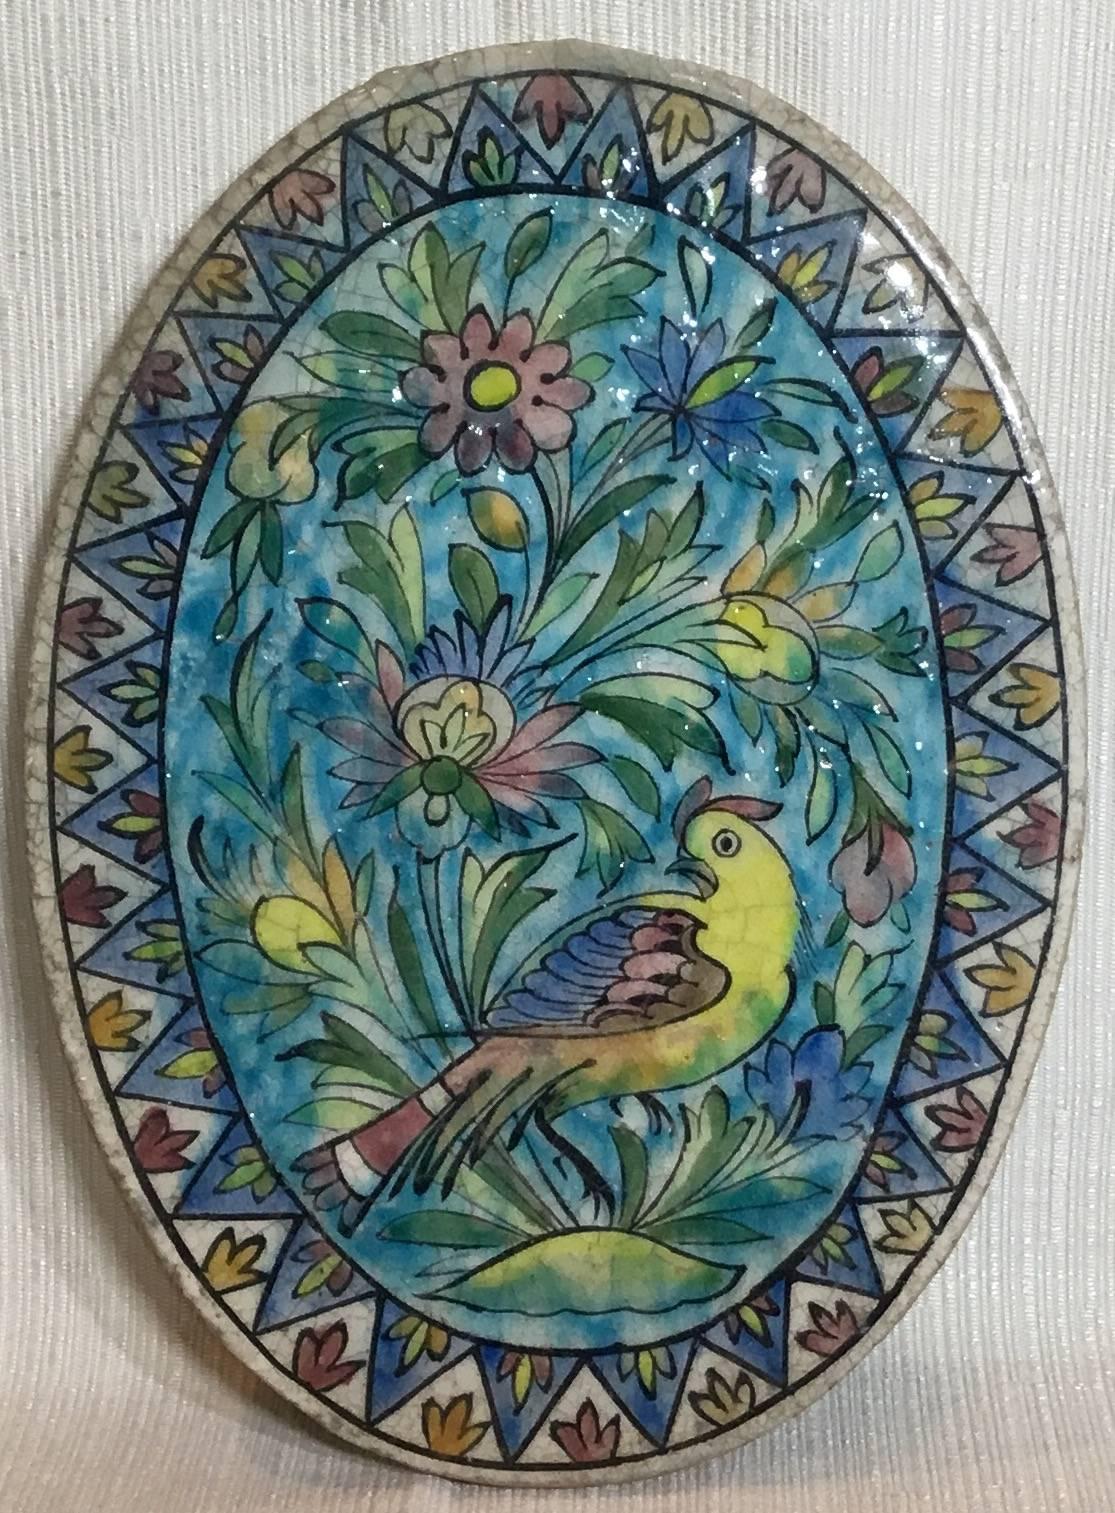 Beautiful hand-painted oval ceramic tile, with exceptional painting of bird 
Surrounded with colorful floral and vine motifs, geometric border around.